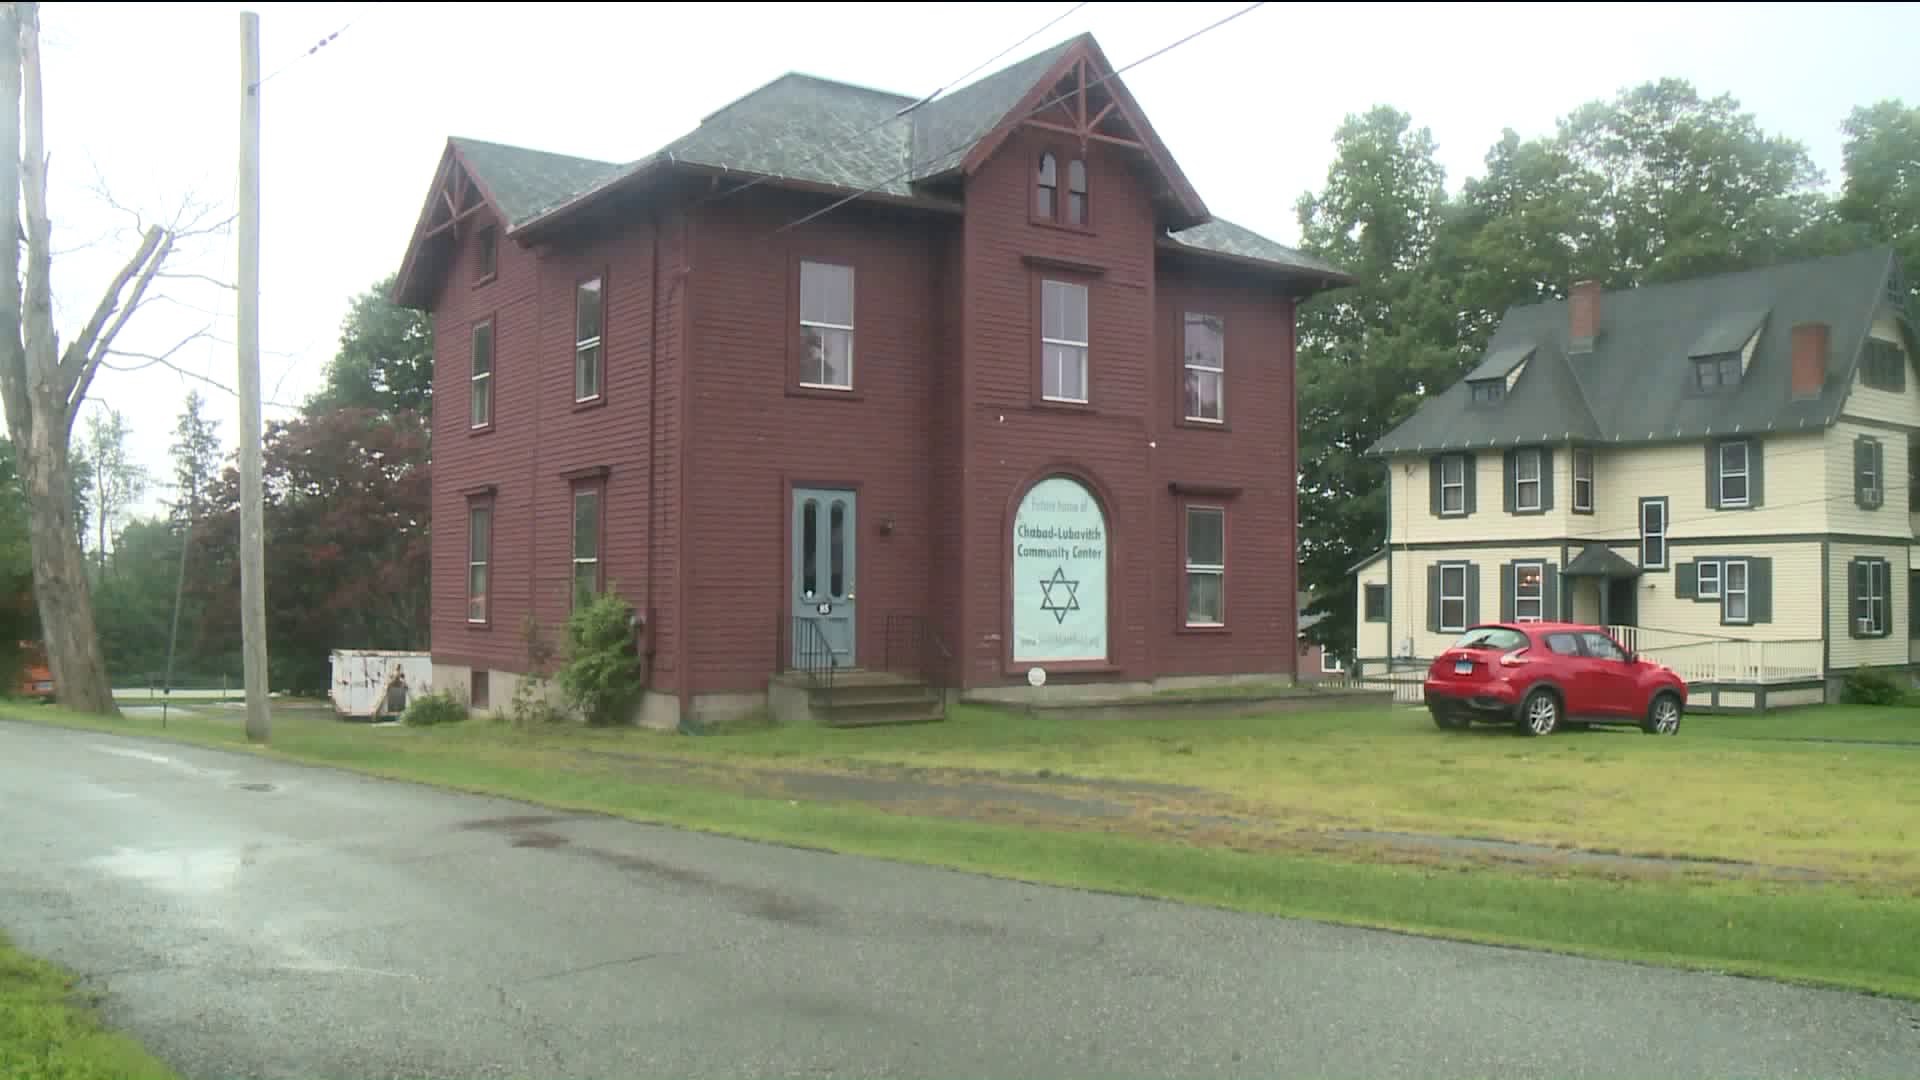 Legal battle continues for Litchfield chabad center